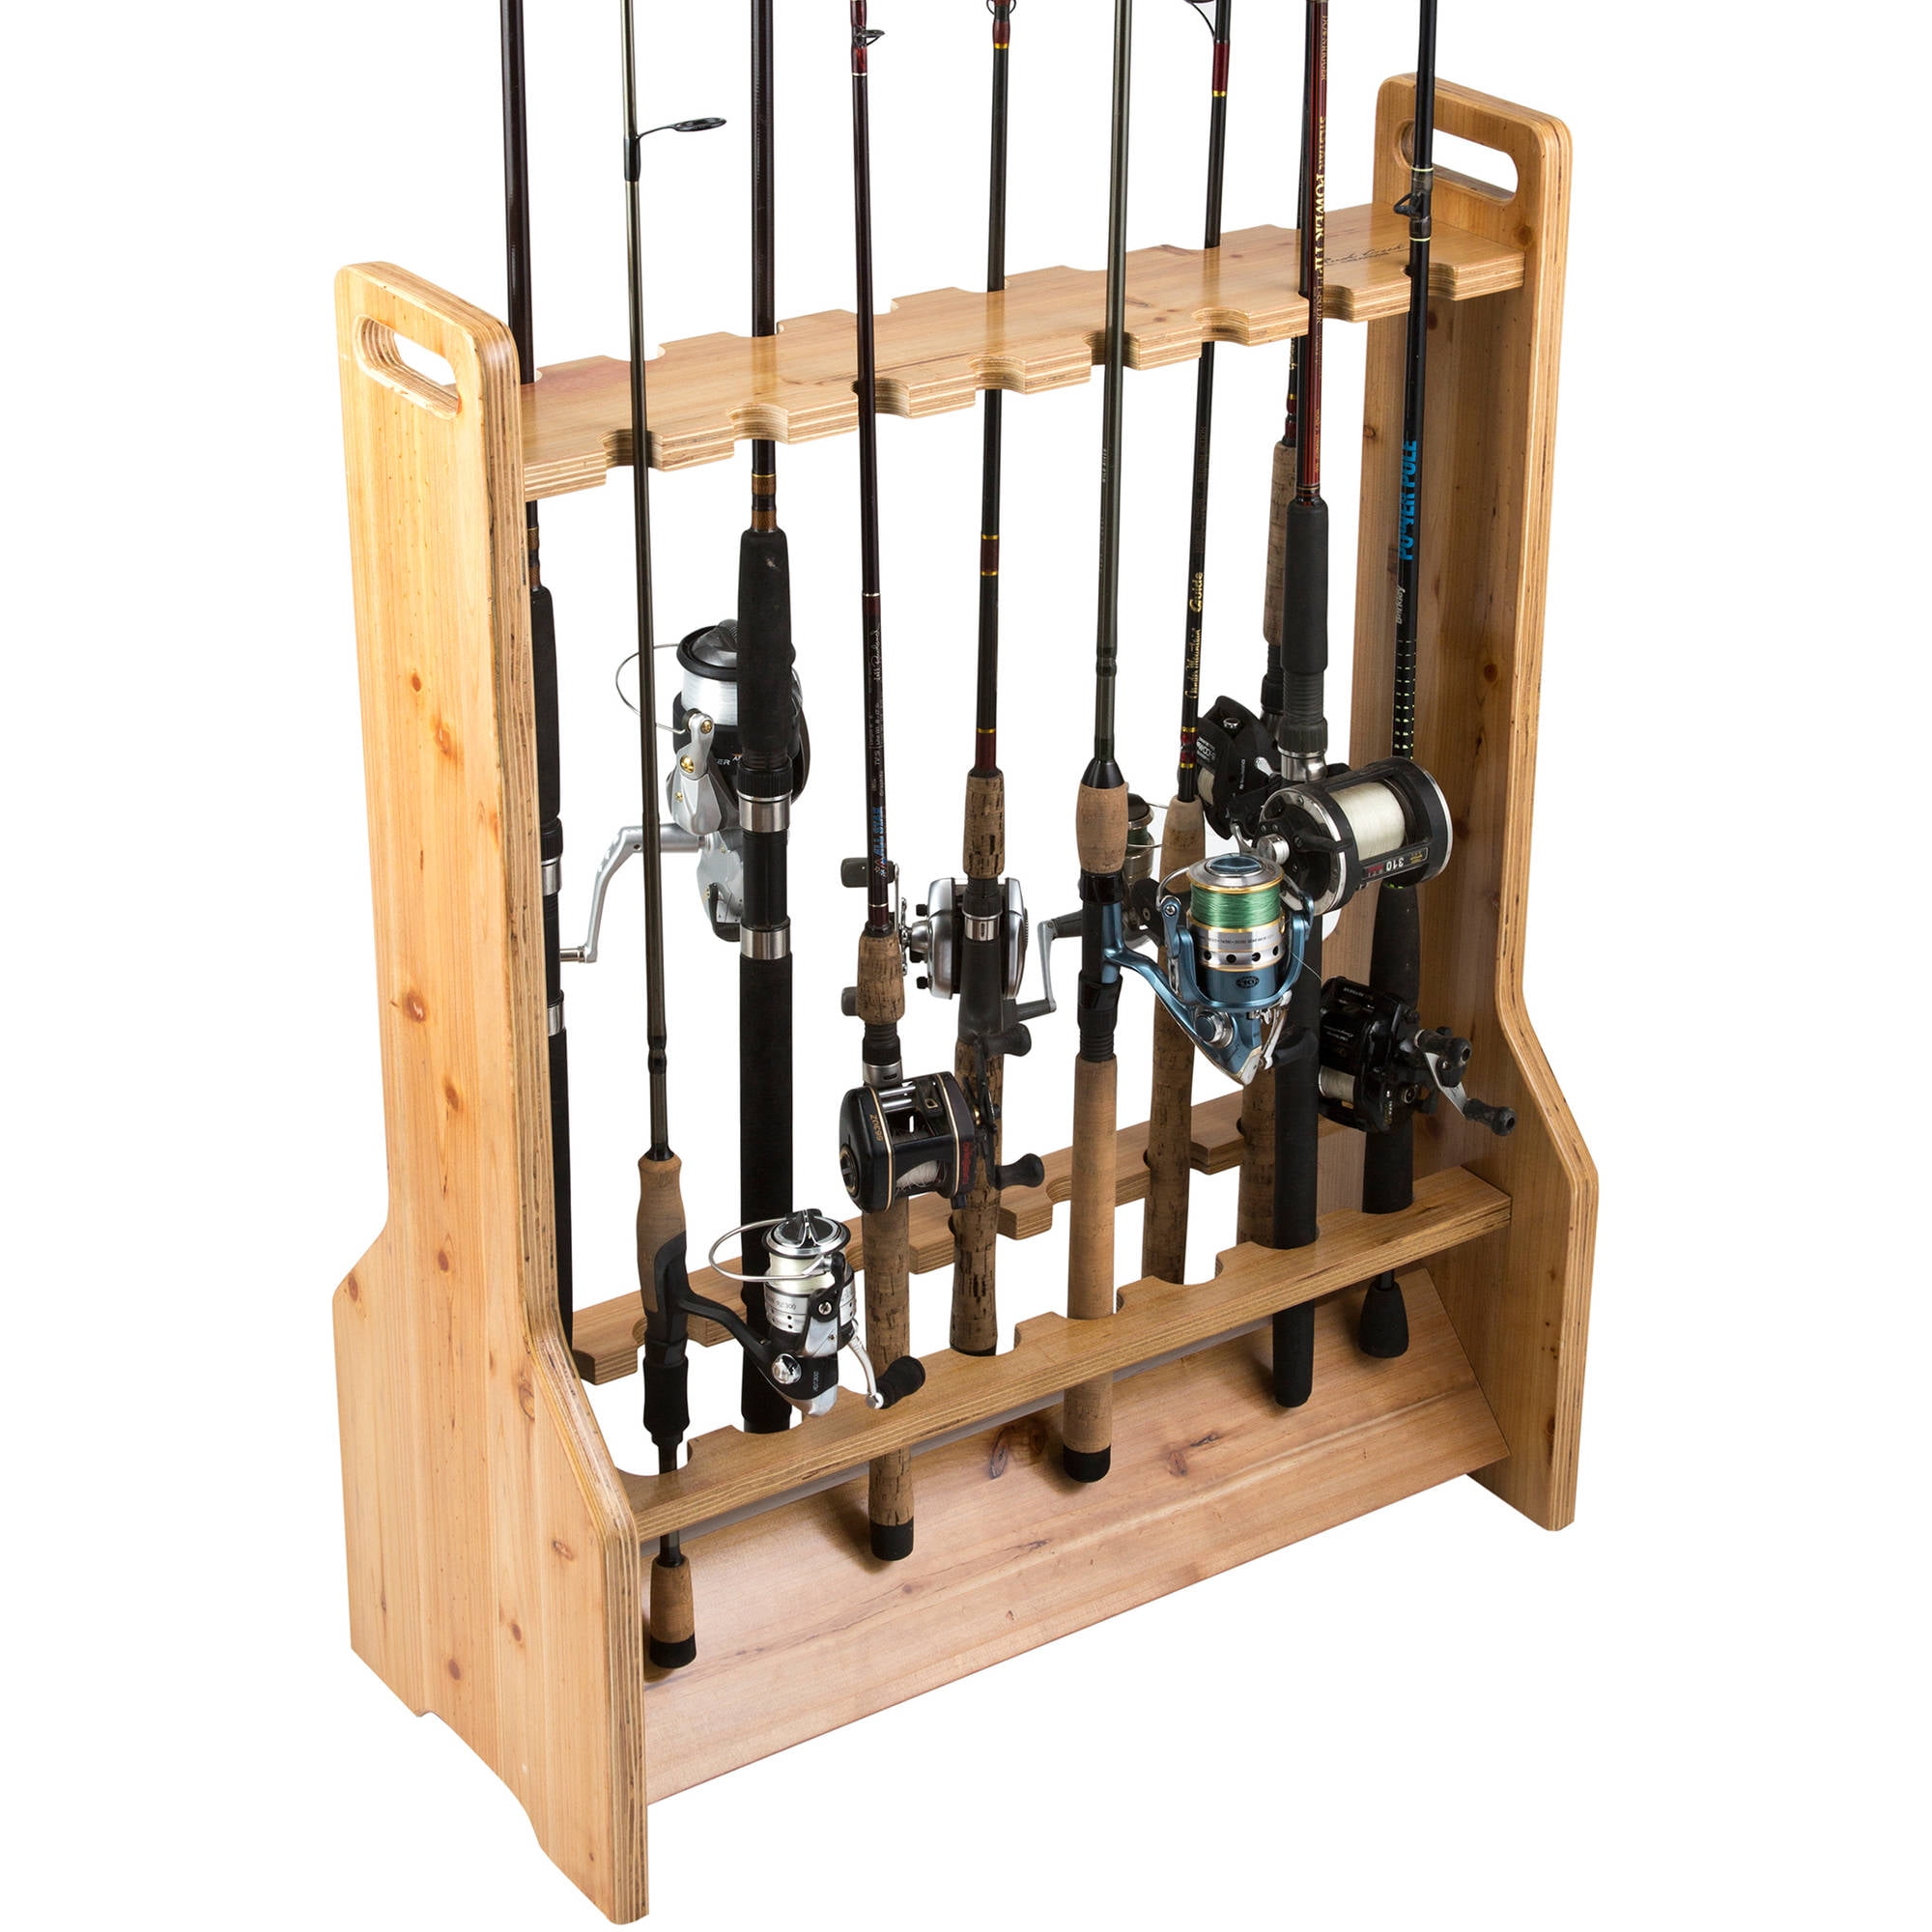 re: Pallet Wood Hand Carved Fishing Rod Rack - Craftisian